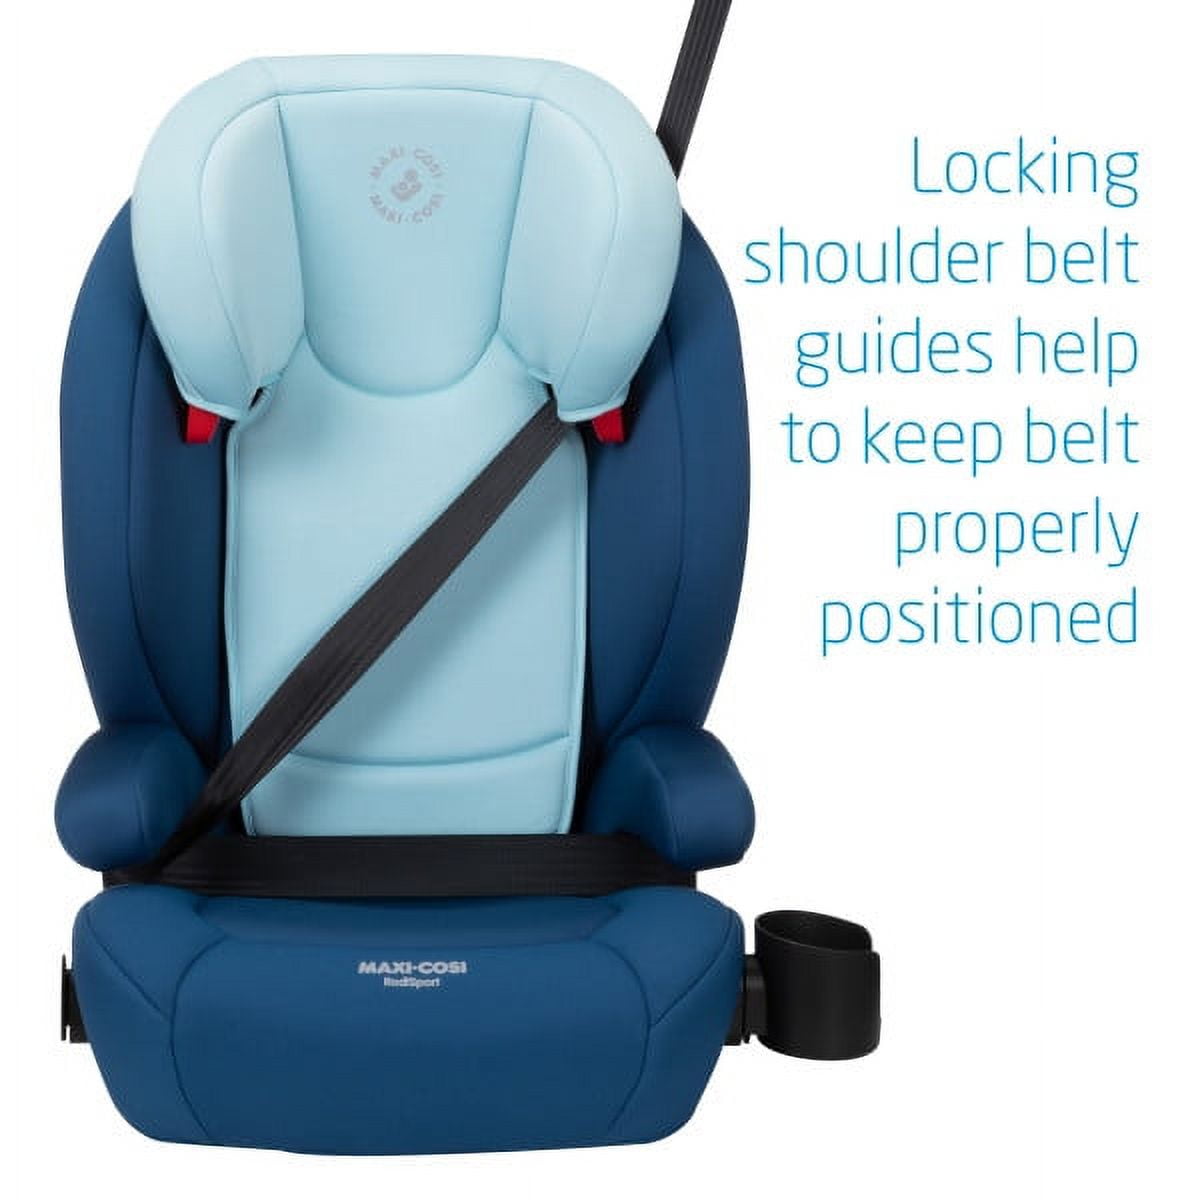 Maxi-Cosi RodiSport Booster Seat Review - Car Seats For The Littles